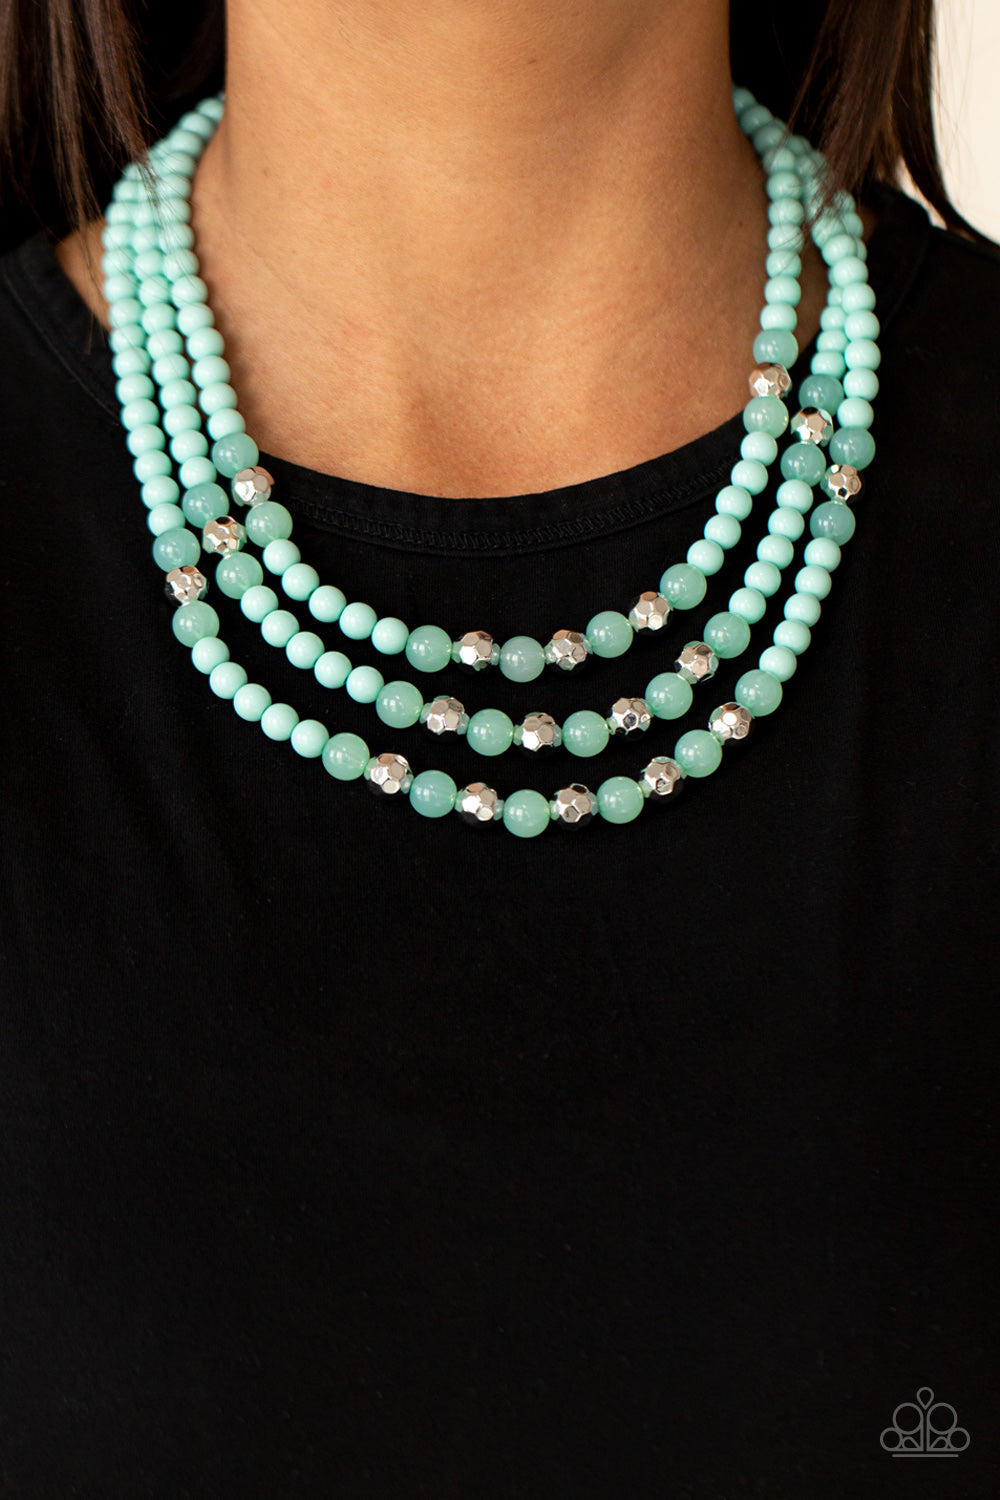 STAYCATION All I Ever Wanted - blue - Paparazzi necklace